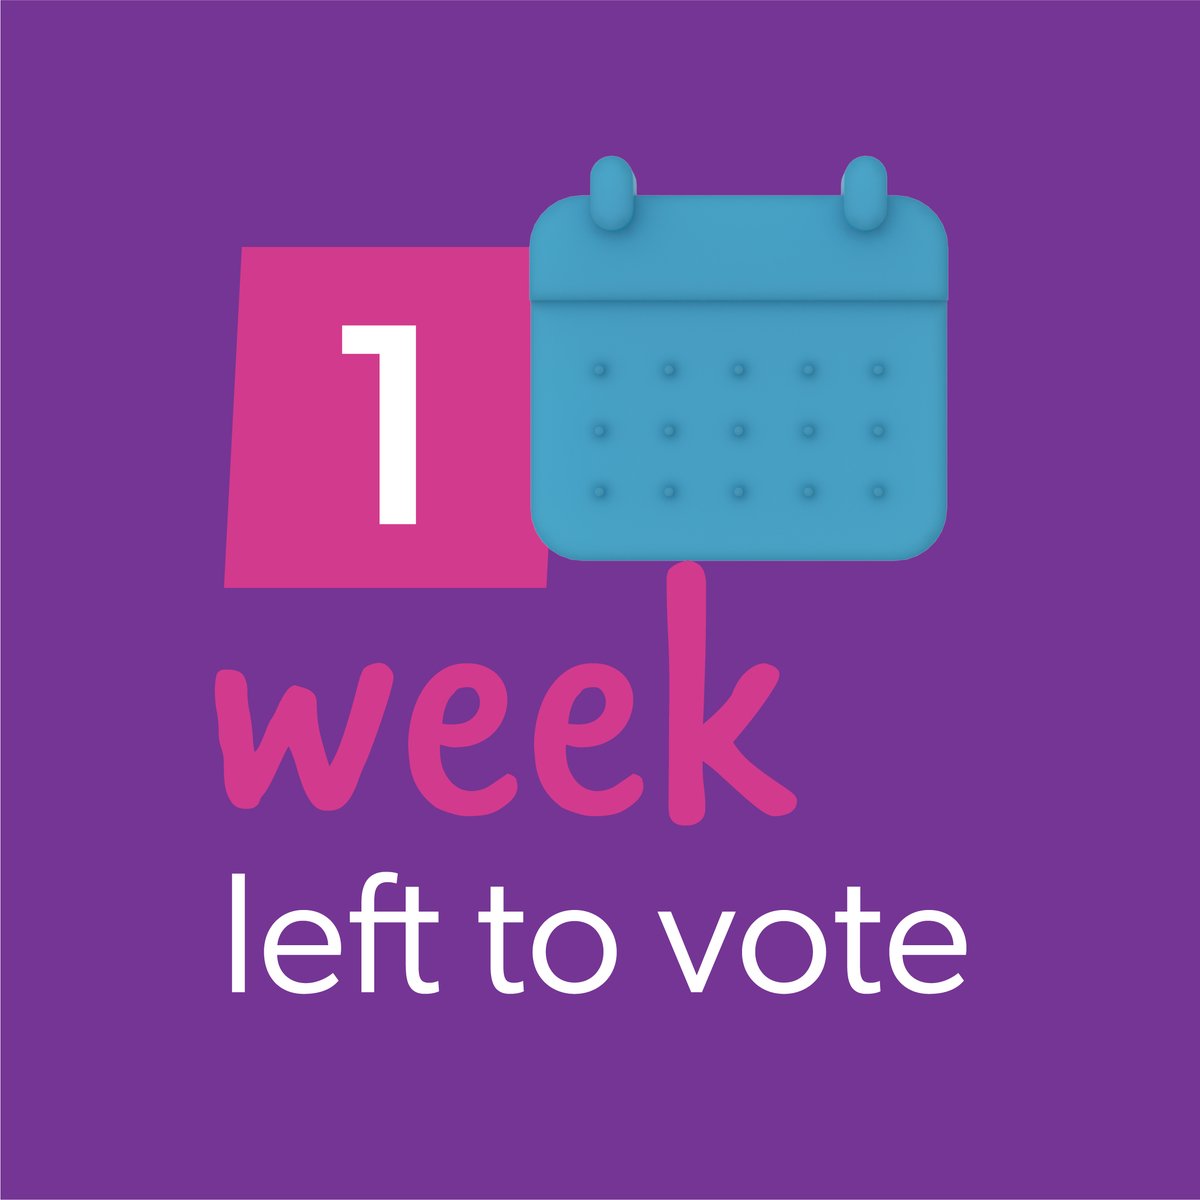 There's only one week left to vote online or via post in our AGM. Head to pulse.ly/kfl4zzref0 to find out how to vote, or attend our AGM in person. Attending our AGM is a brilliant way to reflect on the past year as well as an opportunity to meet our board.